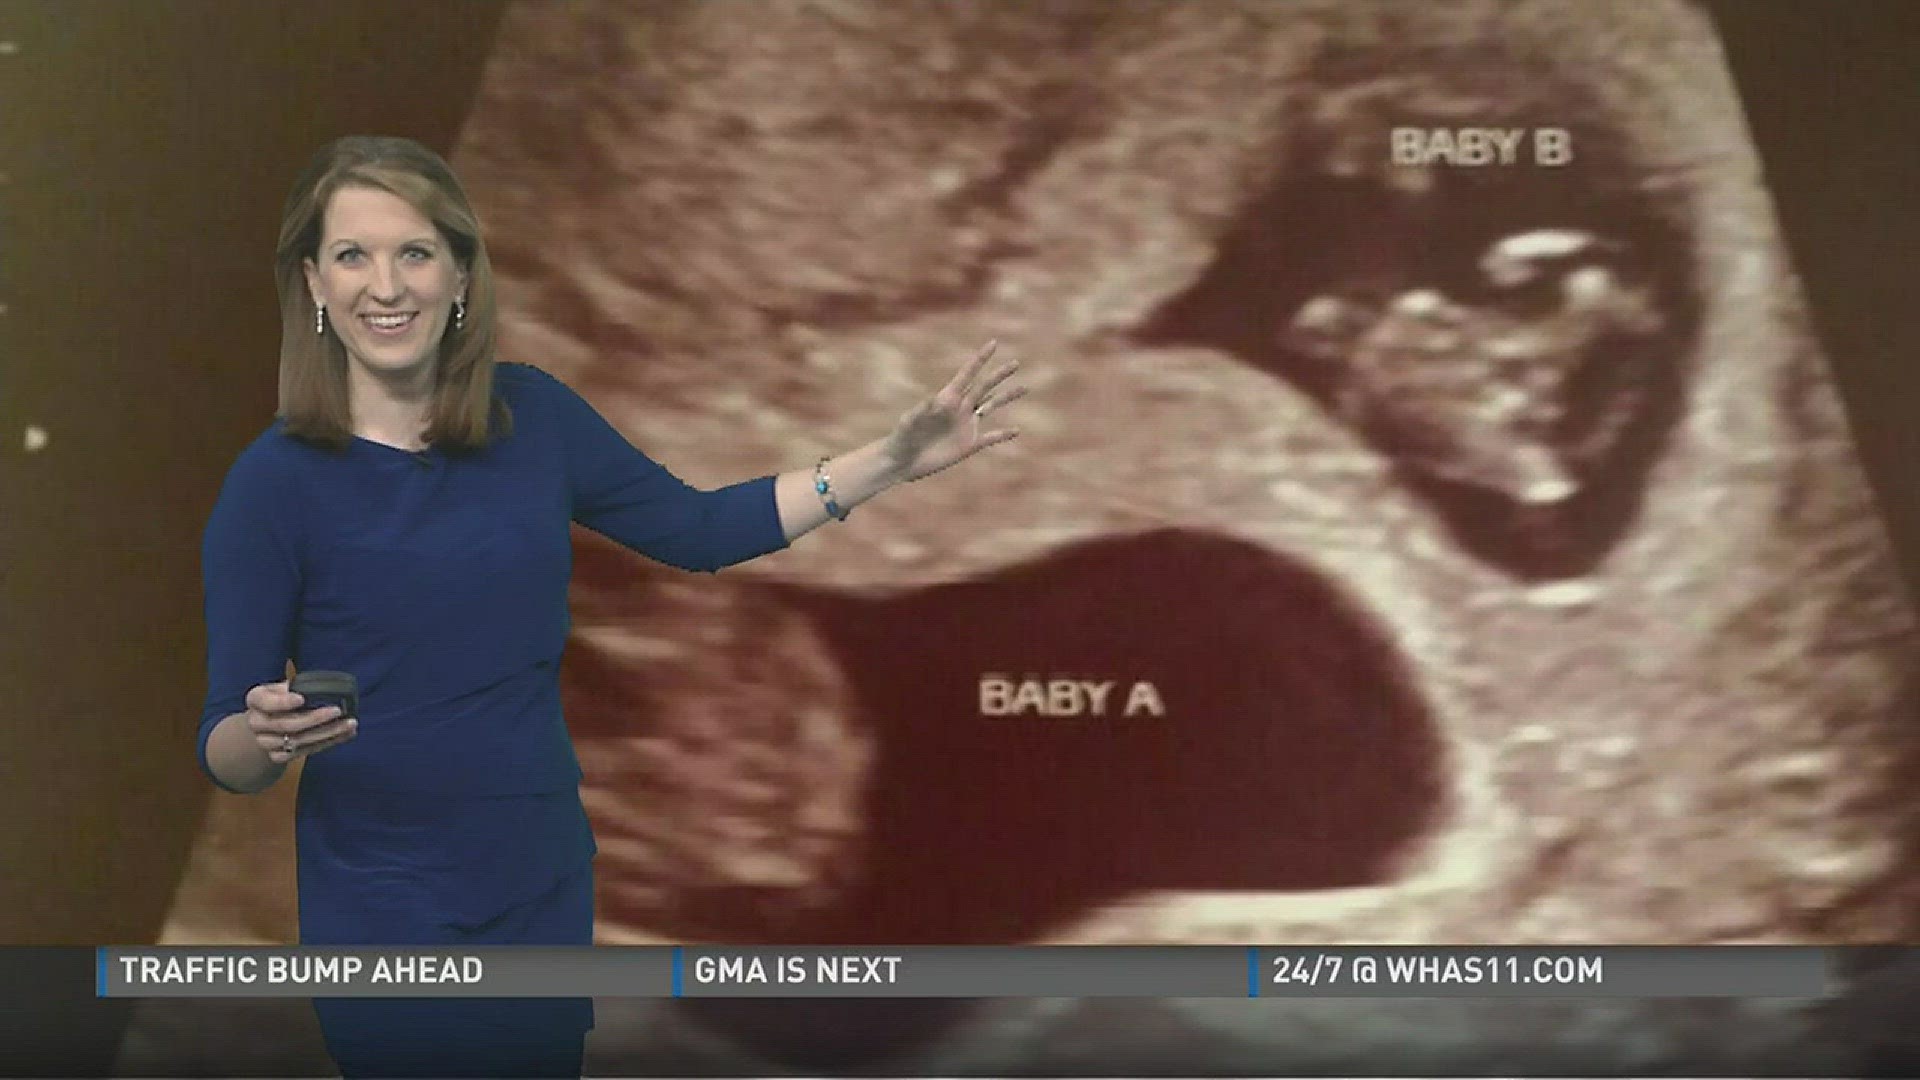 GMK's Brooke Hasch expecting Twins!